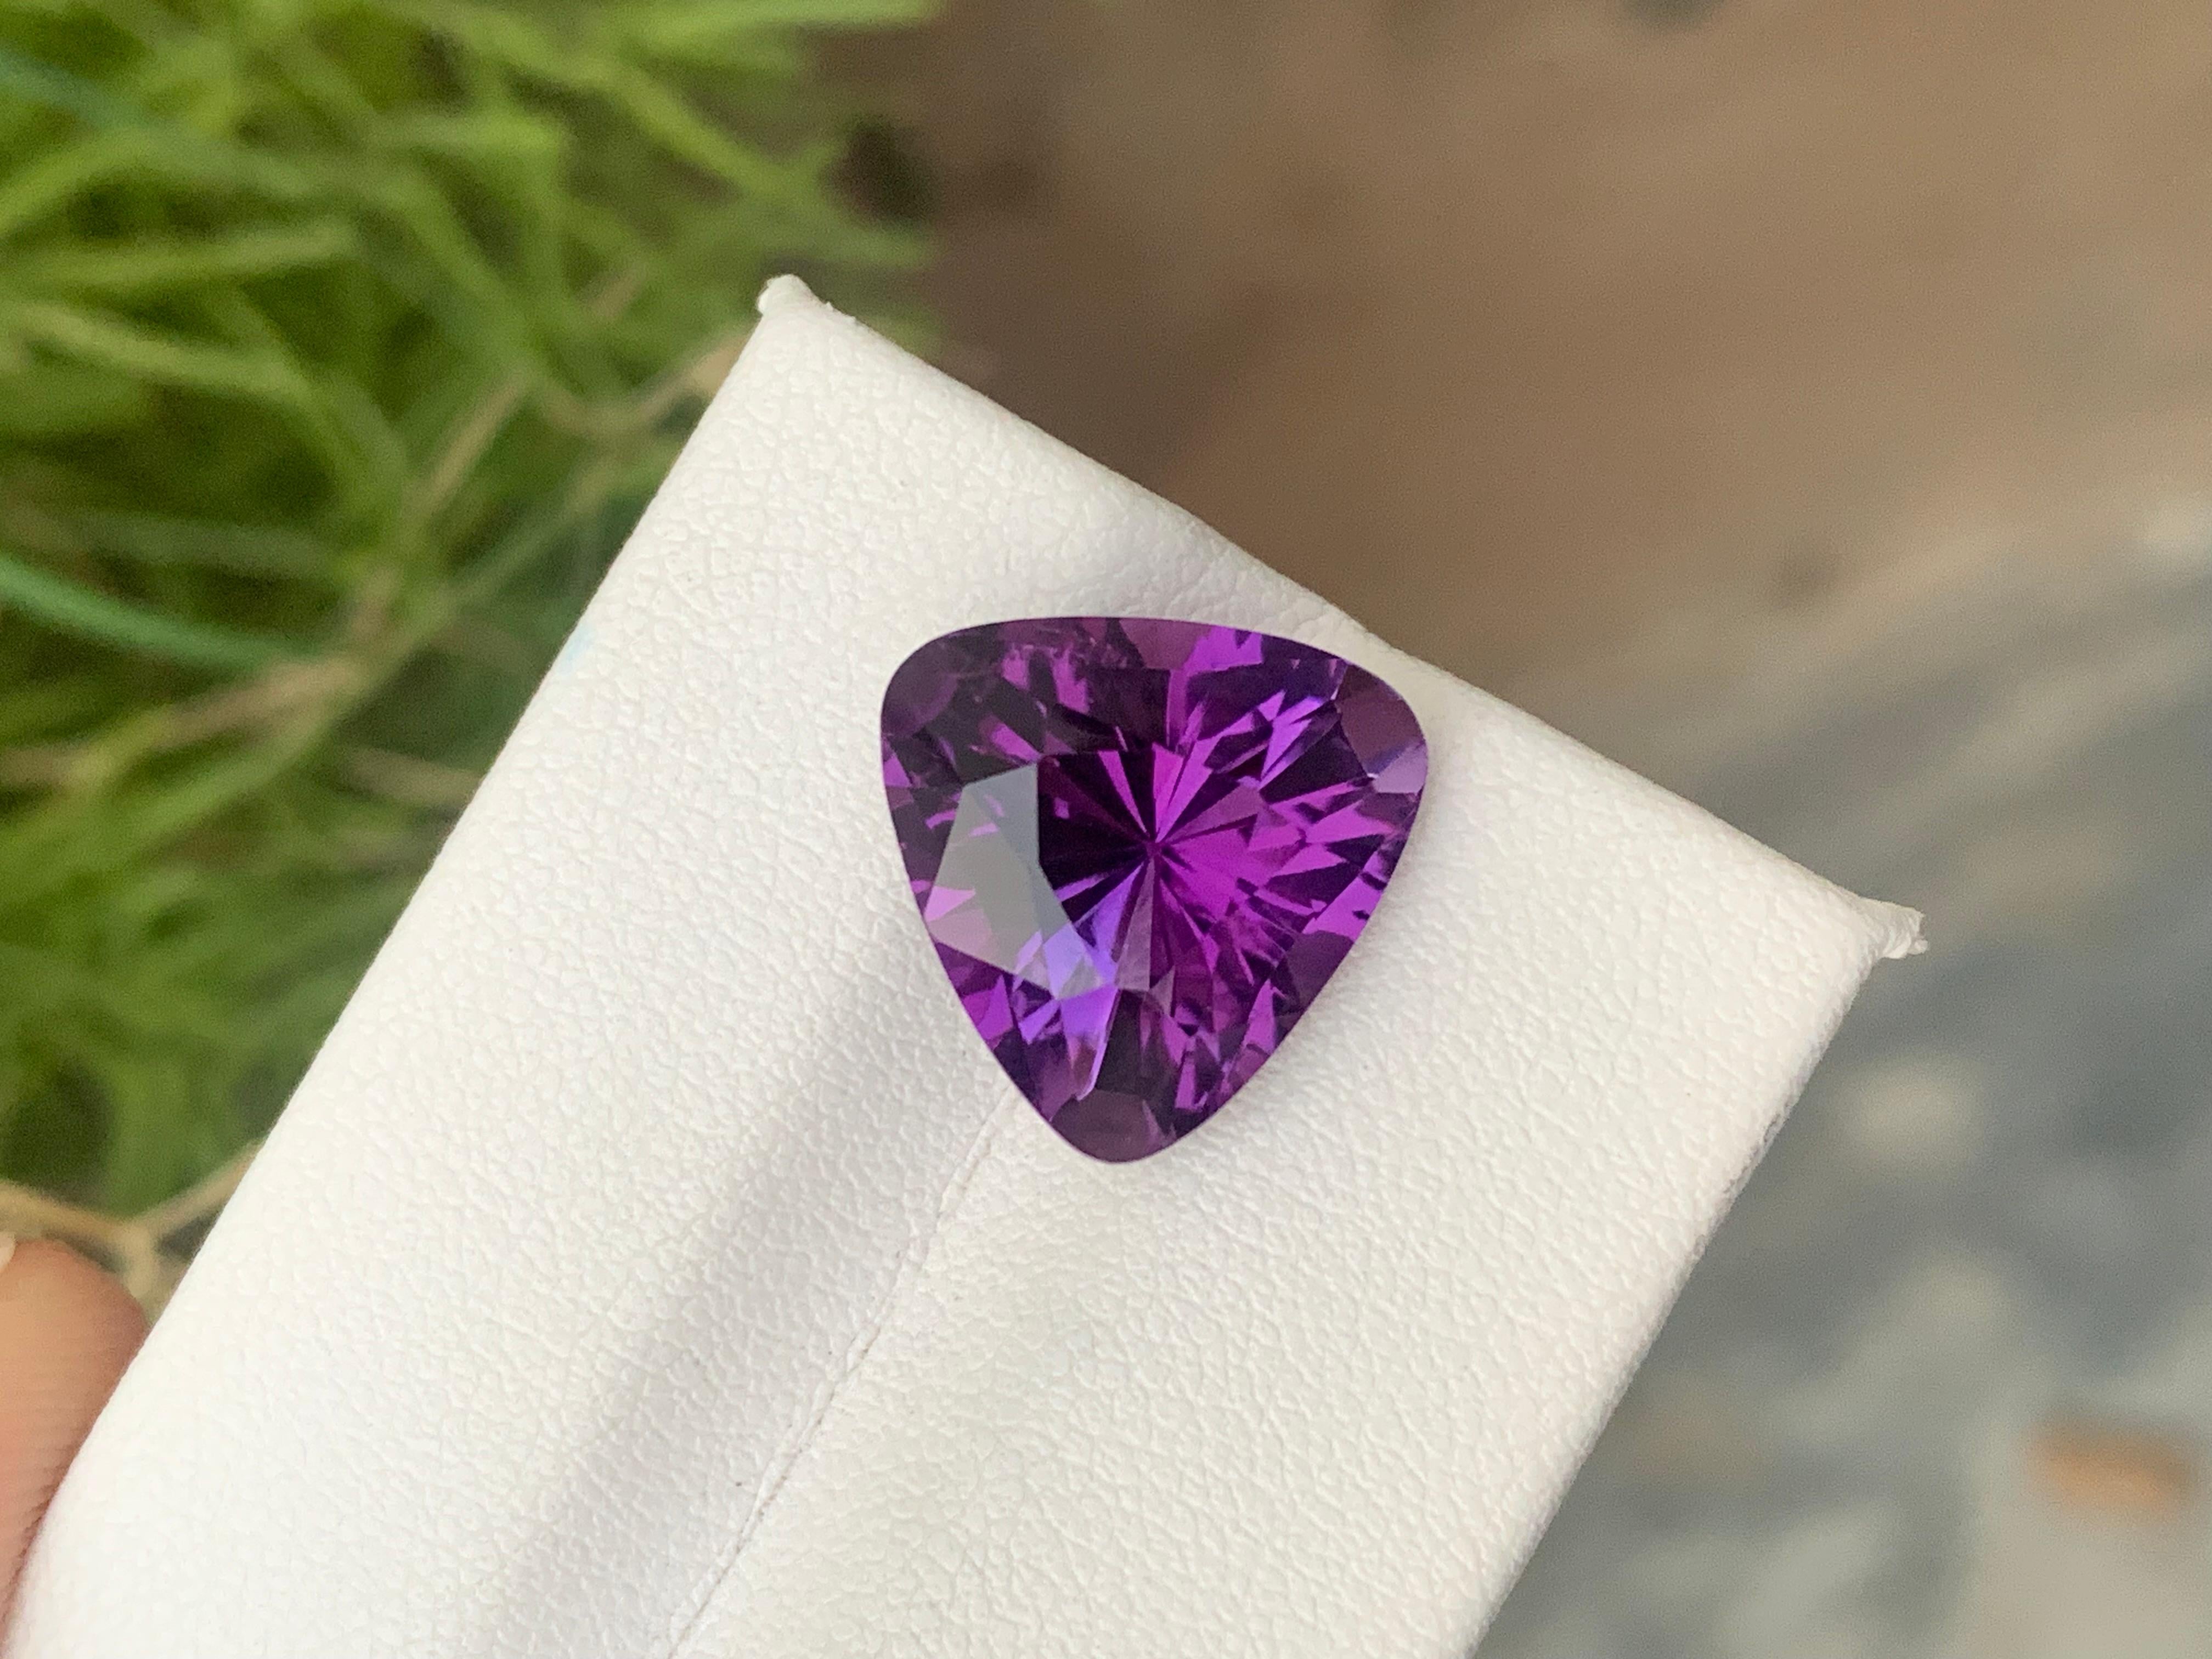 Gemstone Type : Amethyst
Weight : 7.60 Carats
Dimensions : 14x13.4x8.9 mm
Clarity : Eye Clean
Origin : Brazil
Color: Purple
Shape:Trillion
Certificate: On Demand
Month: February
Purported amethyst powers for healing
enhancing the immune